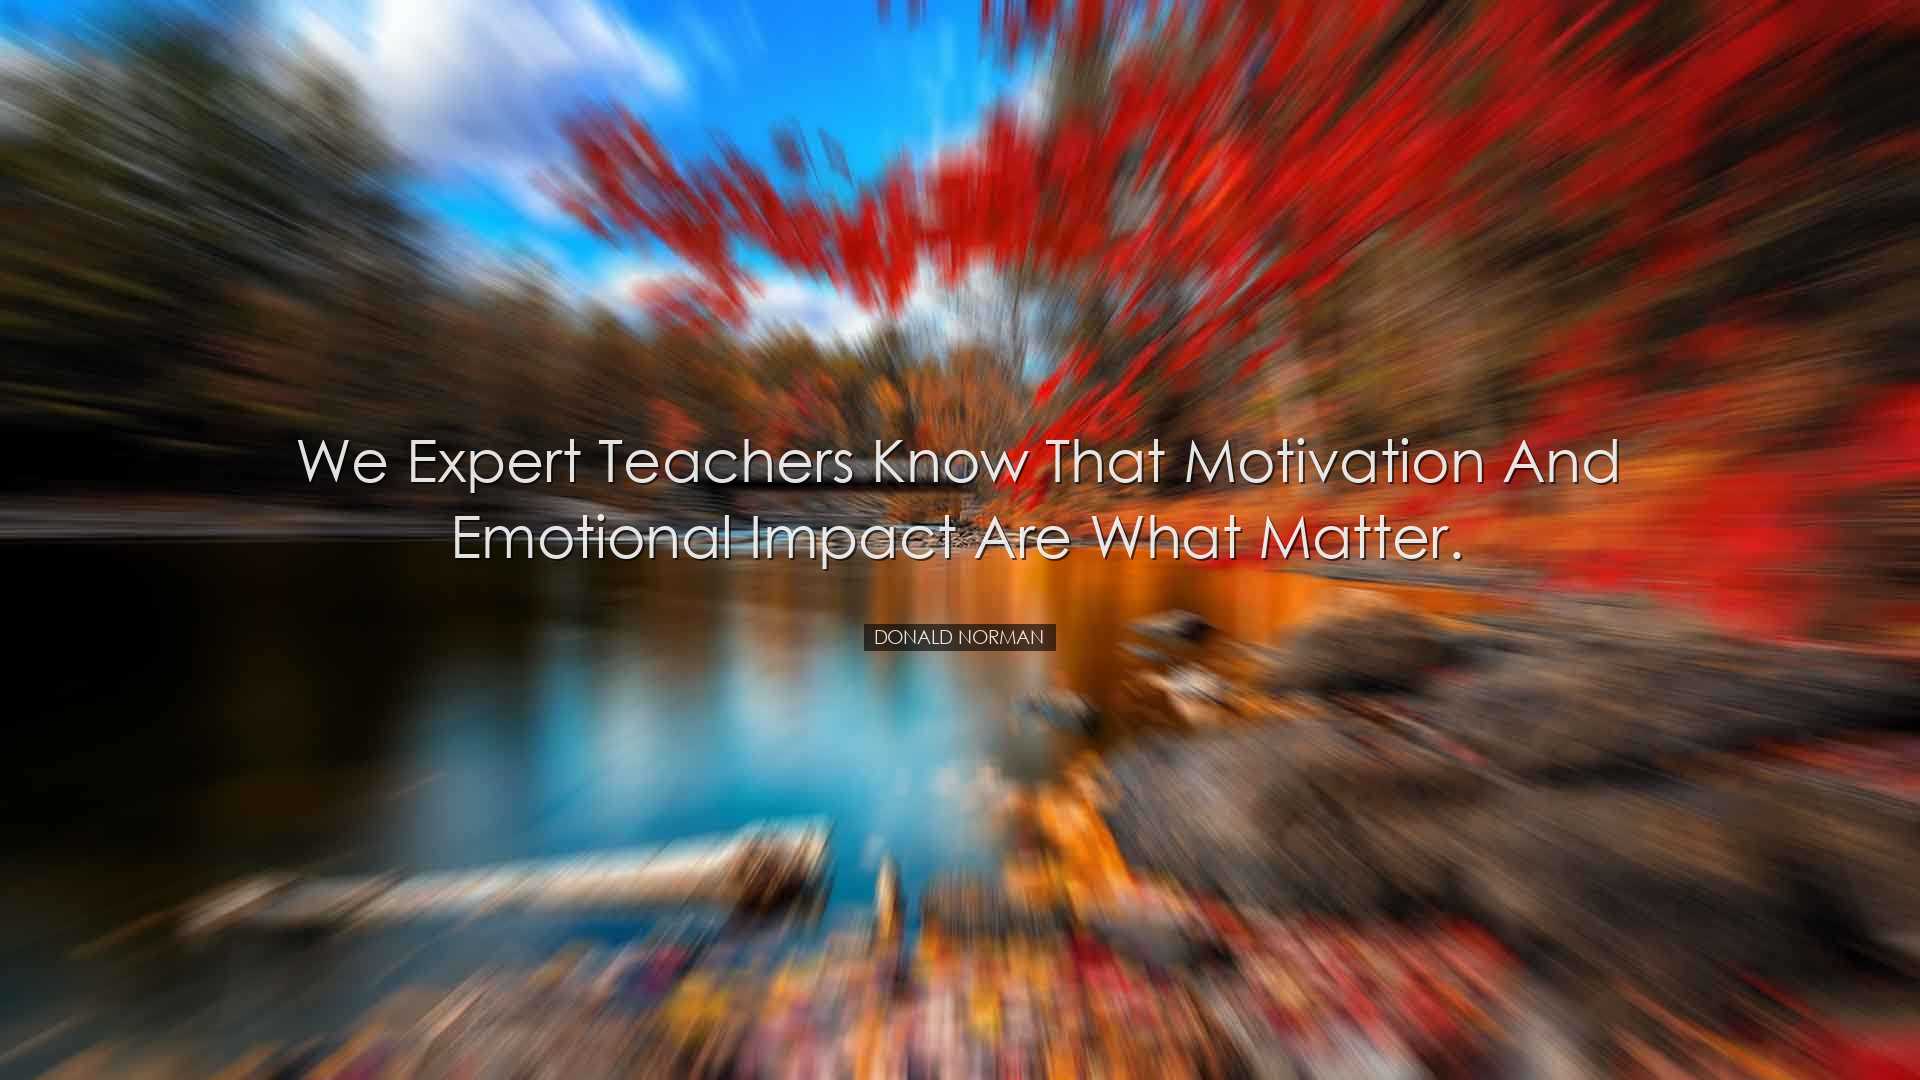 We expert teachers know that motivation and emotional impact are w